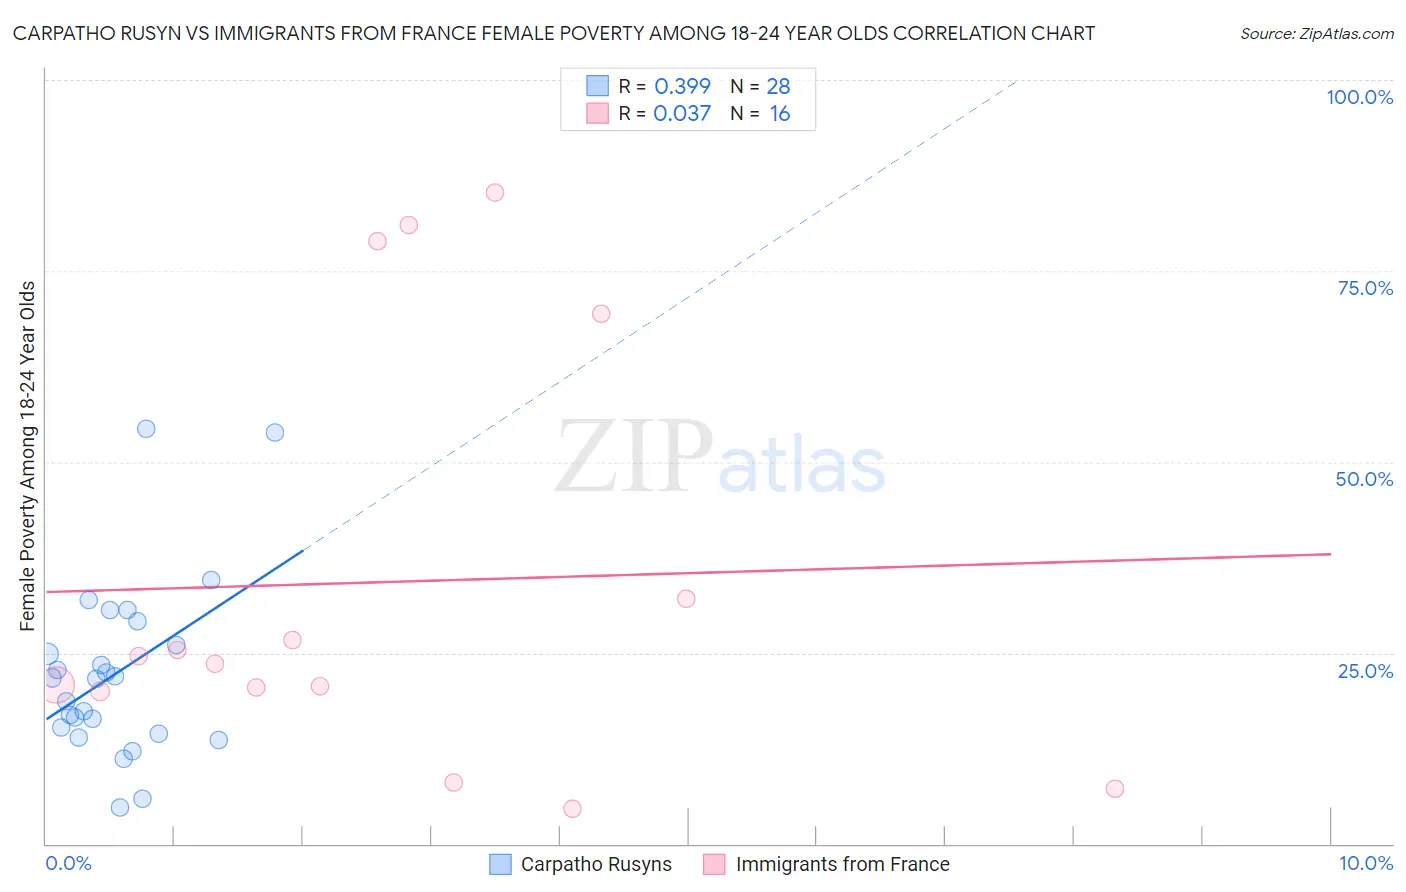 Carpatho Rusyn vs Immigrants from France Female Poverty Among 18-24 Year Olds